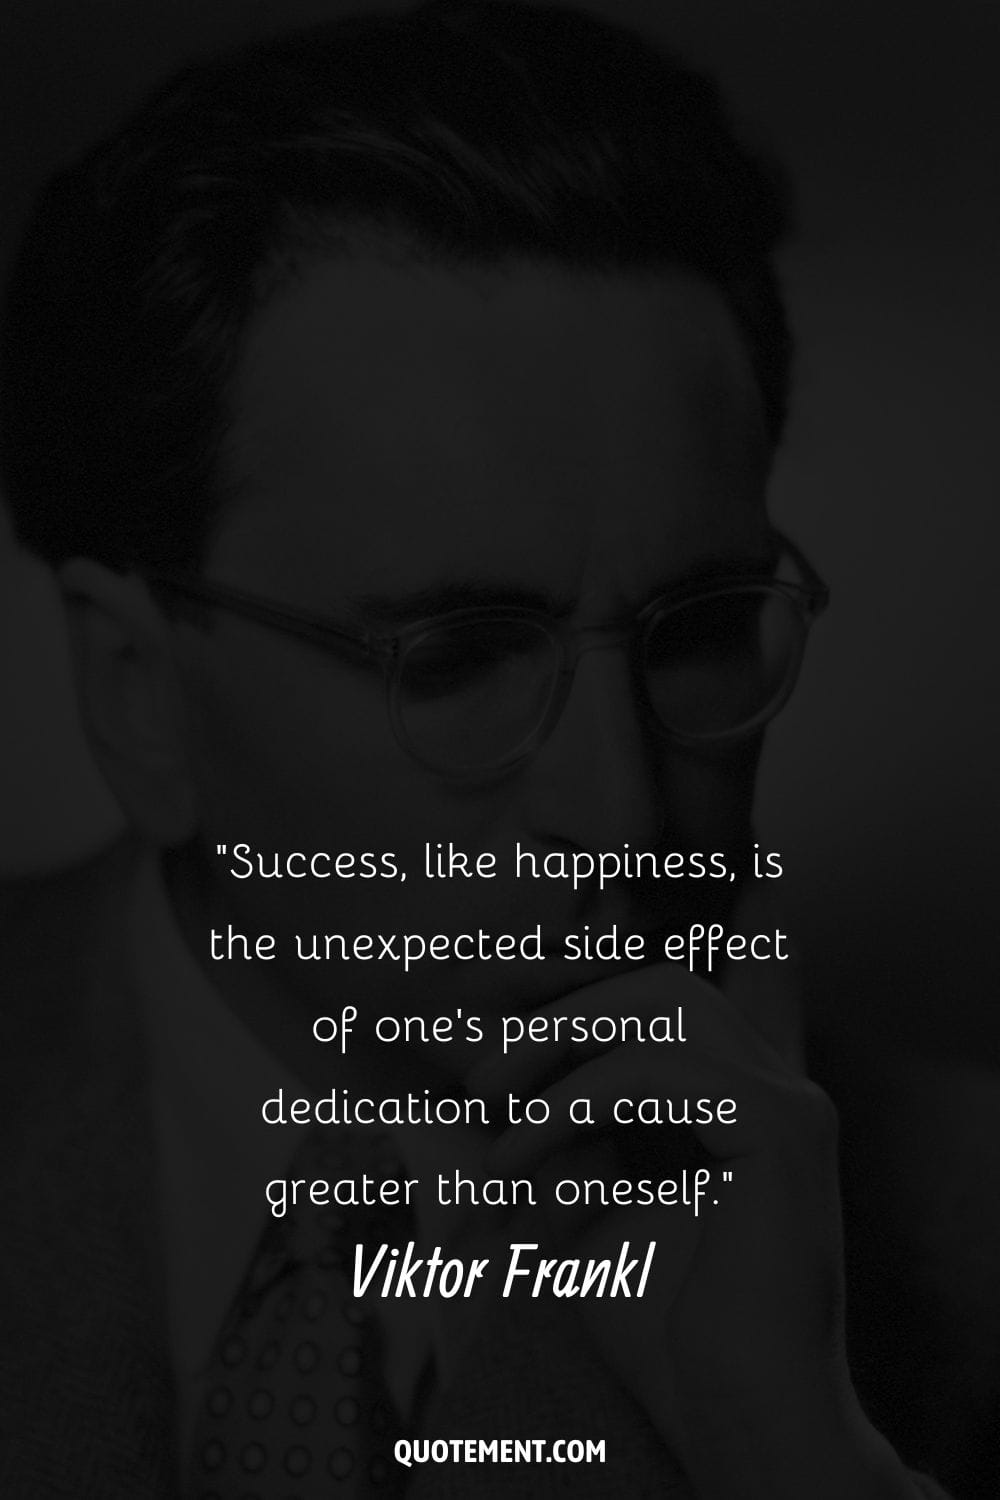 Monochrome portrayal of Viktor Frankl representing his quote on success.